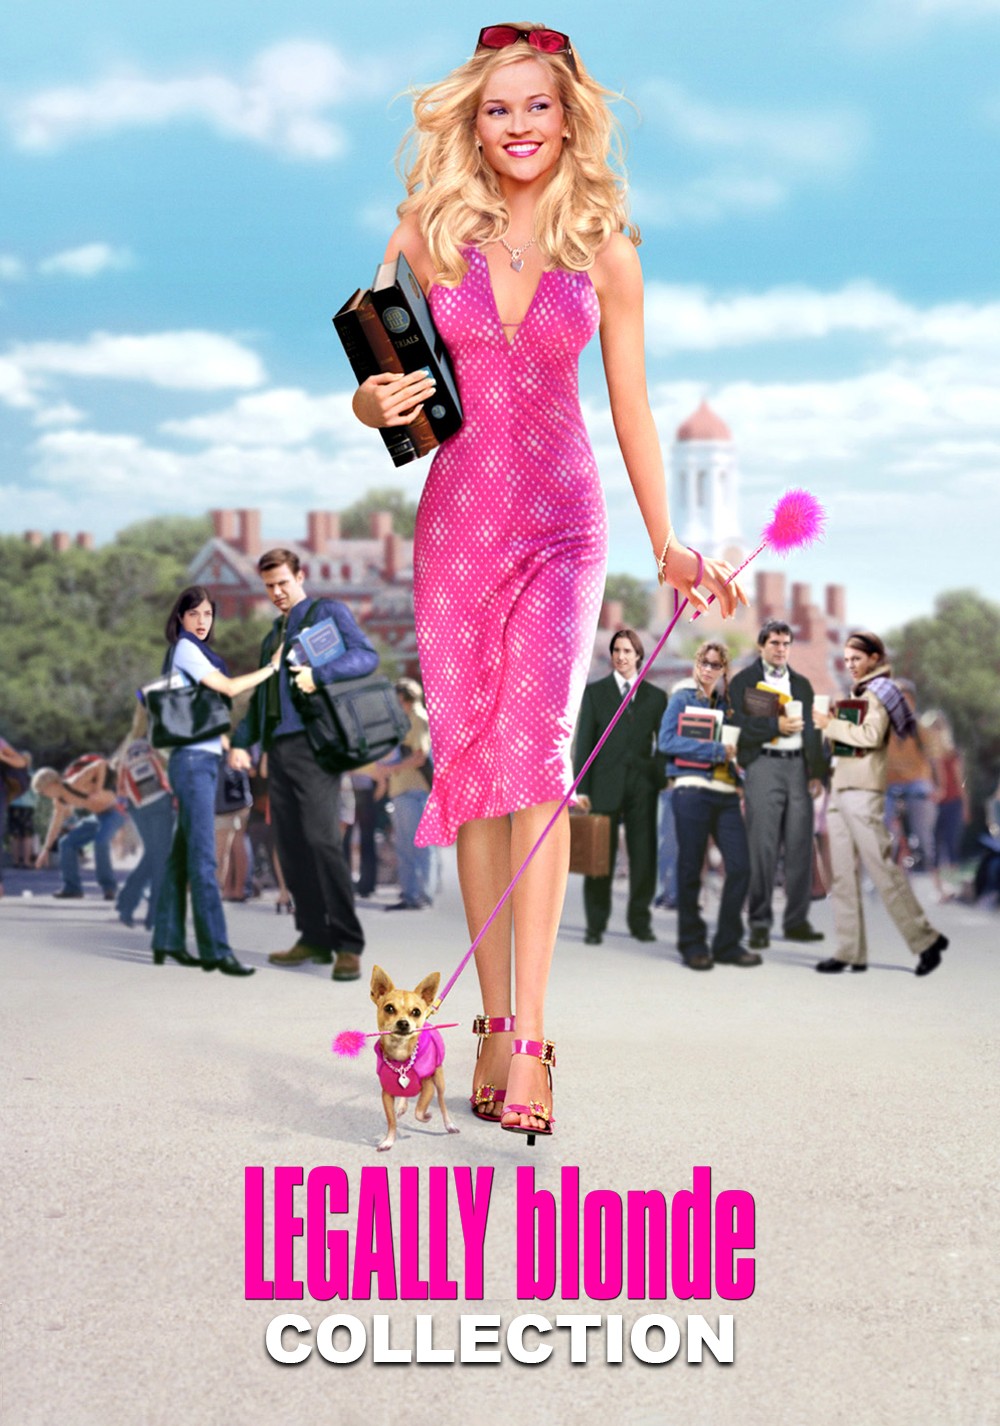 Image Legally Blonde in Posters by theo00 album.